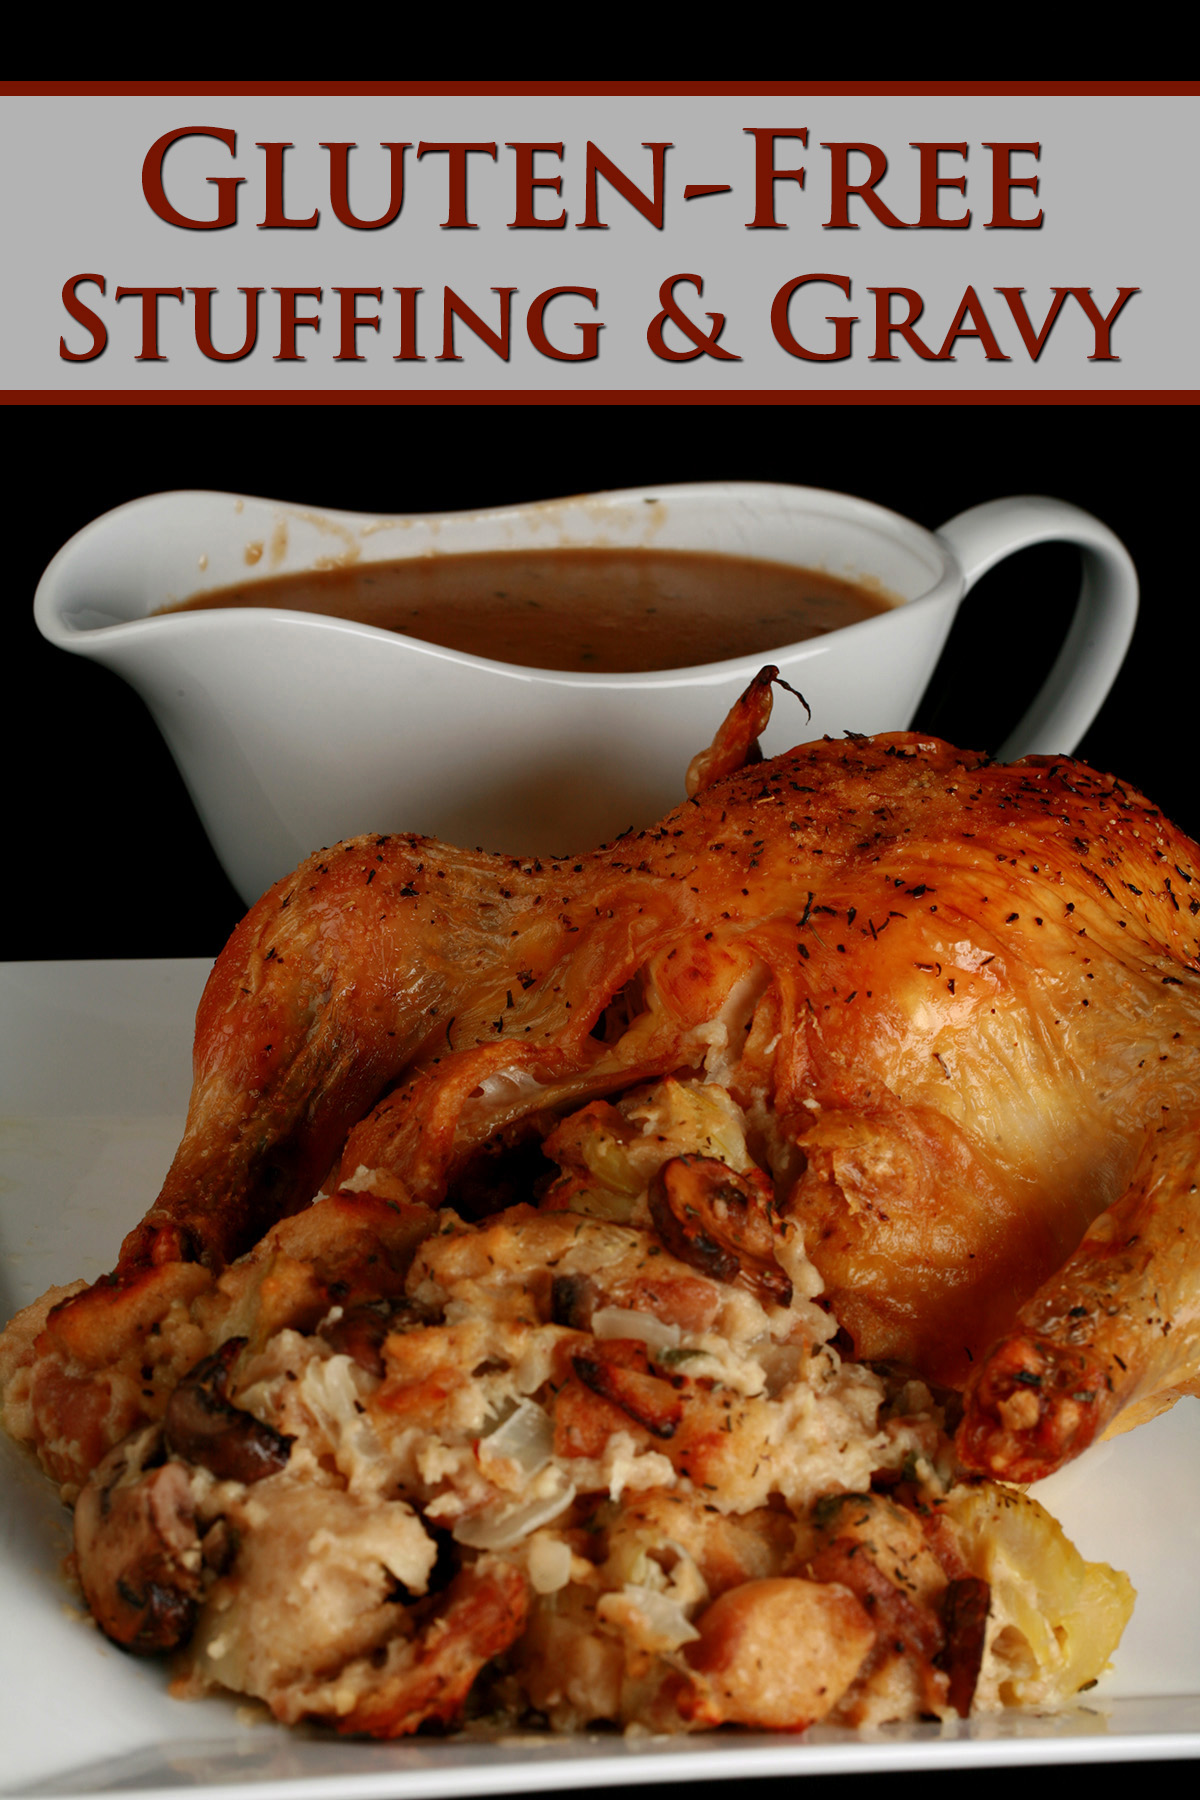 A small roasted turkey on a platter, with gluten-free stuffing spilling out from it. There is a gravy boat with gluten-free gravy in it, next to the turkey.